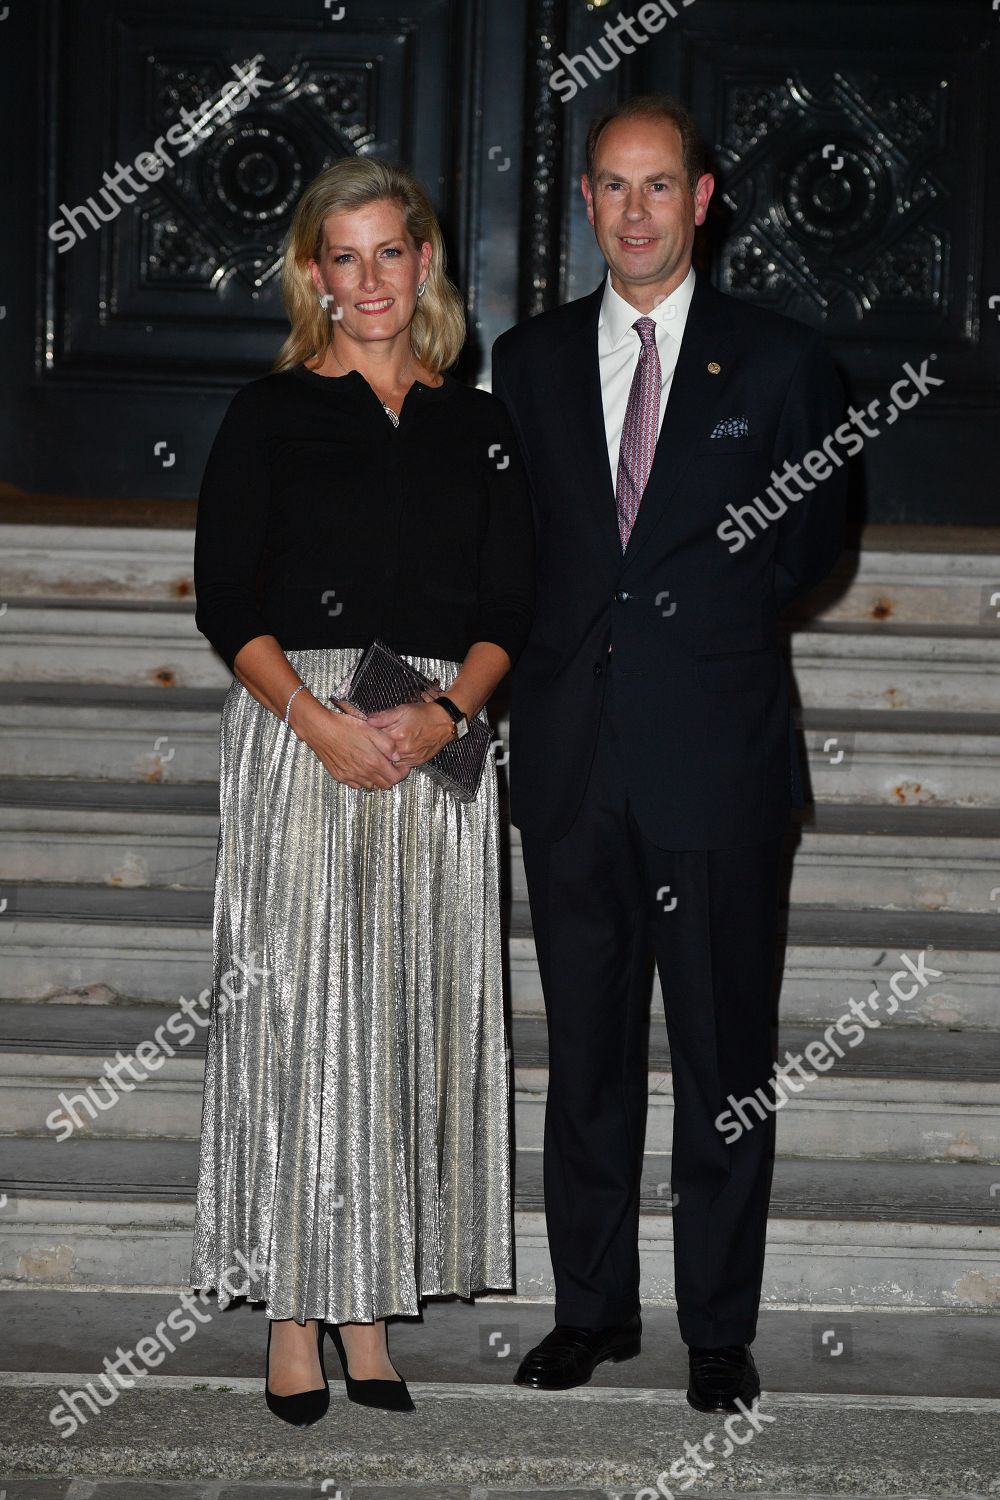 prince-edward-and-sophie-countess-of-wessex-visit-to-france-shutterstock-editorial-9907868as.jpg